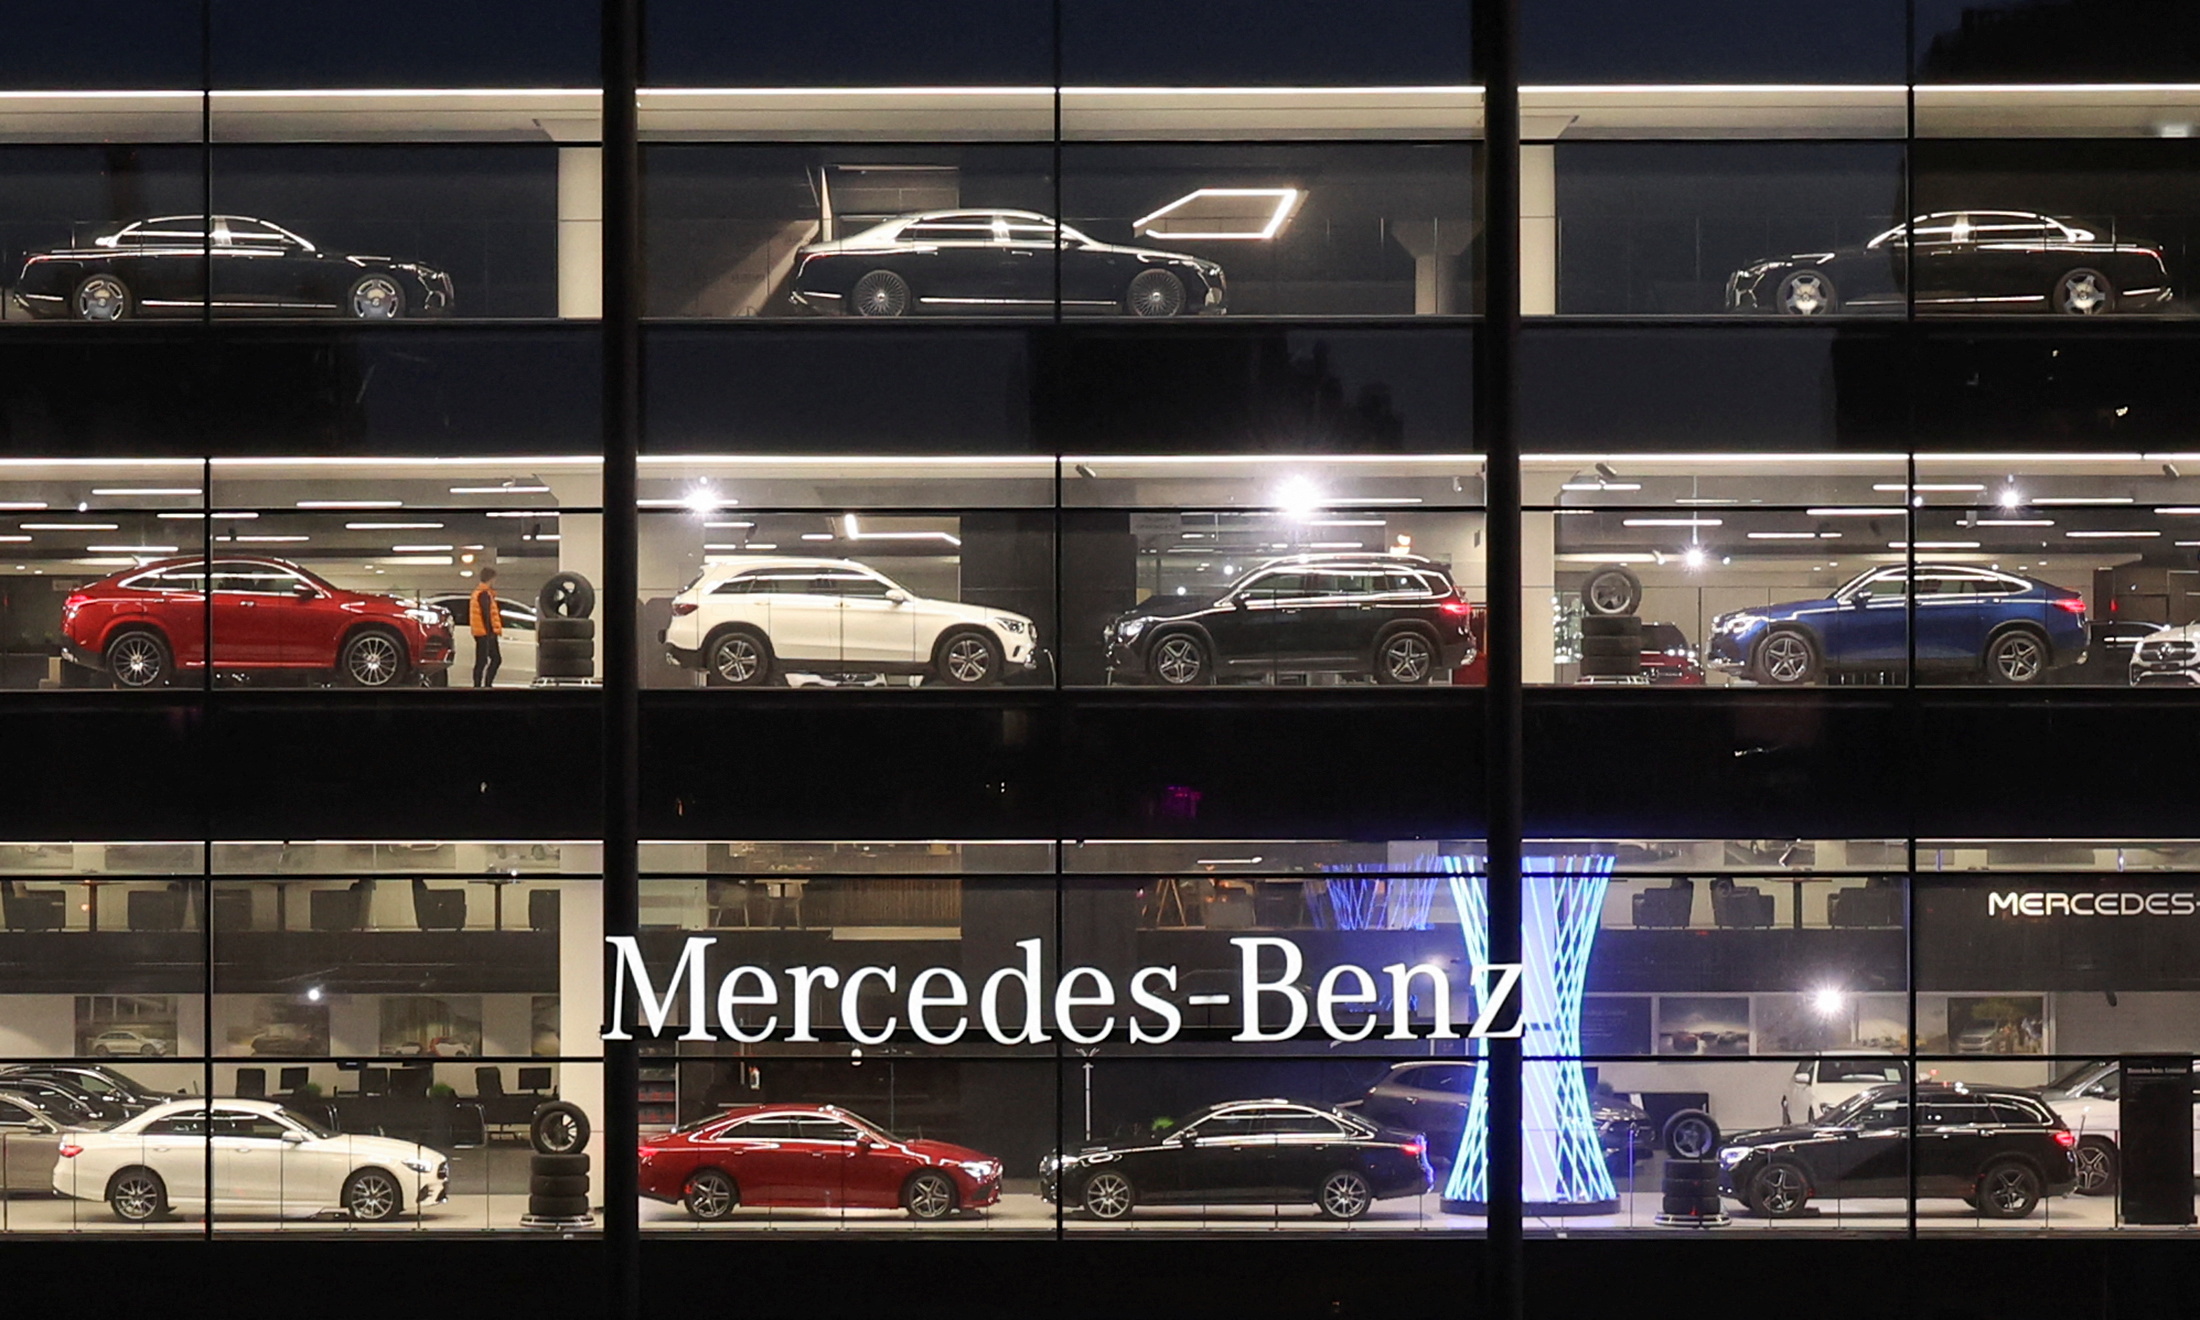 Mercedes-Benz cars are on display for sale at a showroom in Saint Petersburg